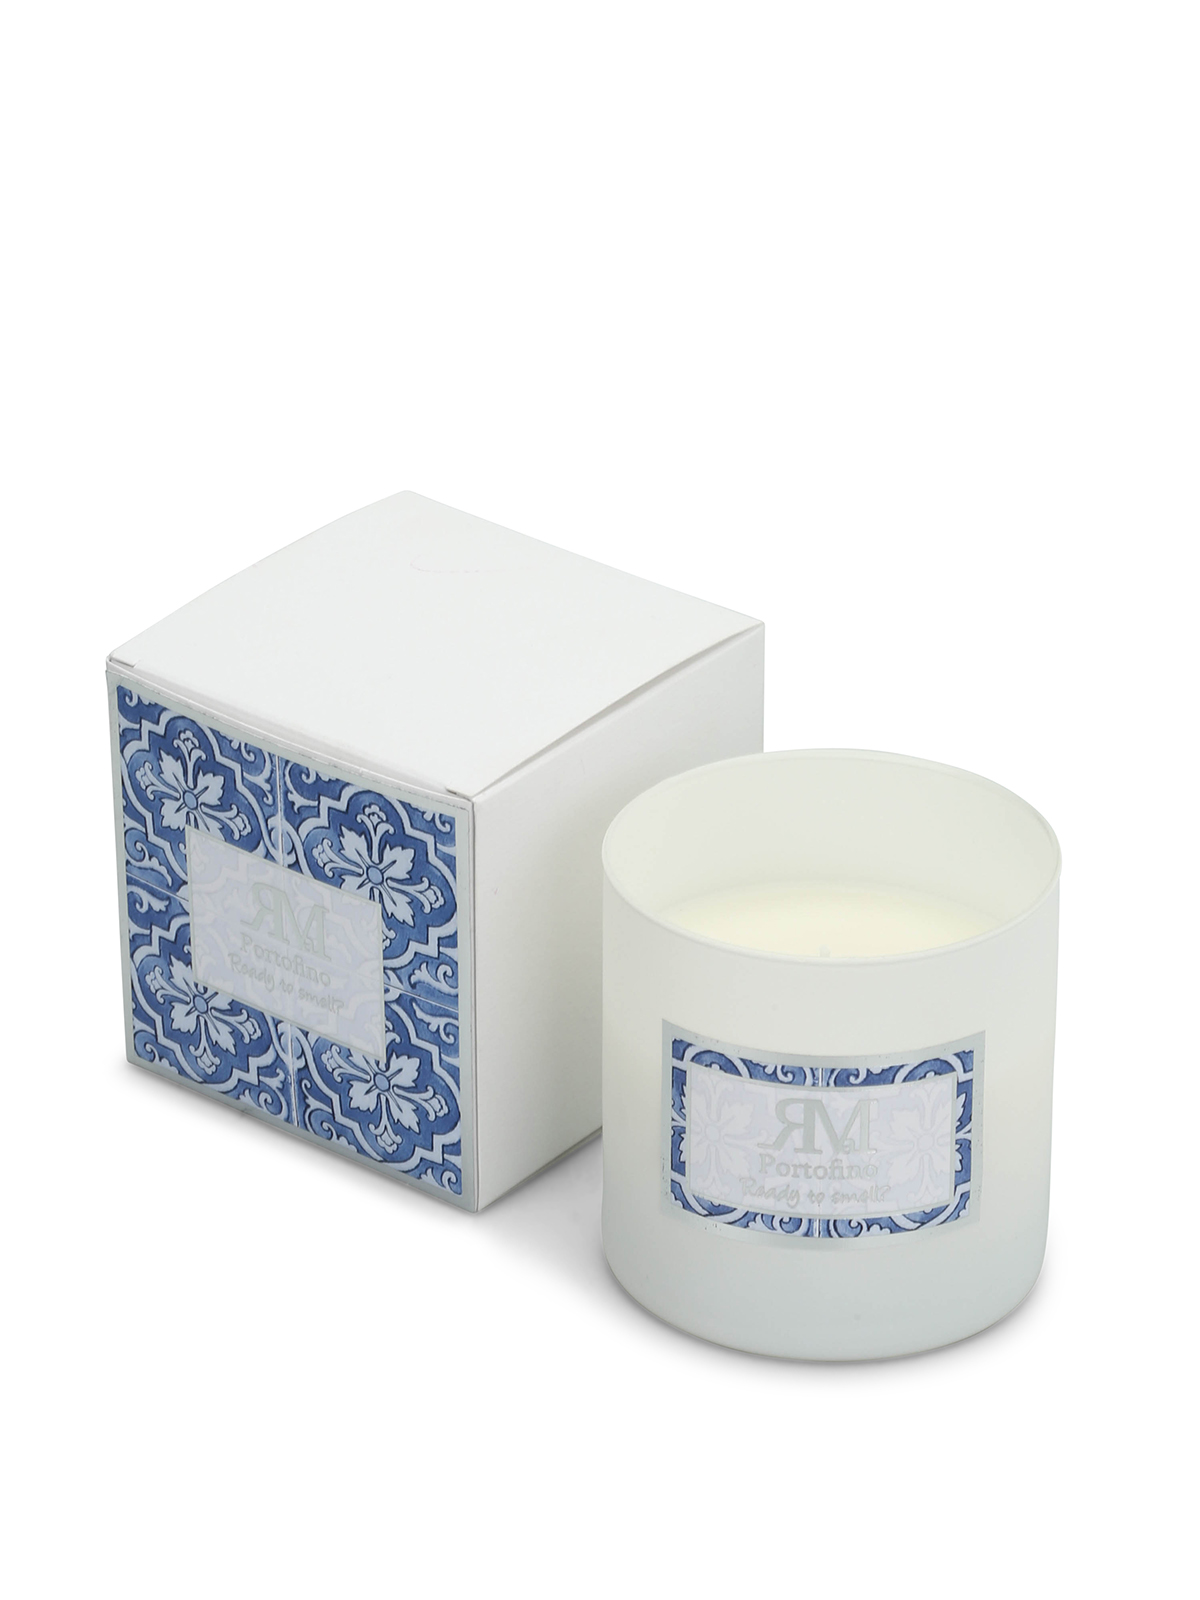 Home fragrance Ready to smell? - MaR Collection - Portofino - | iKRIX.com